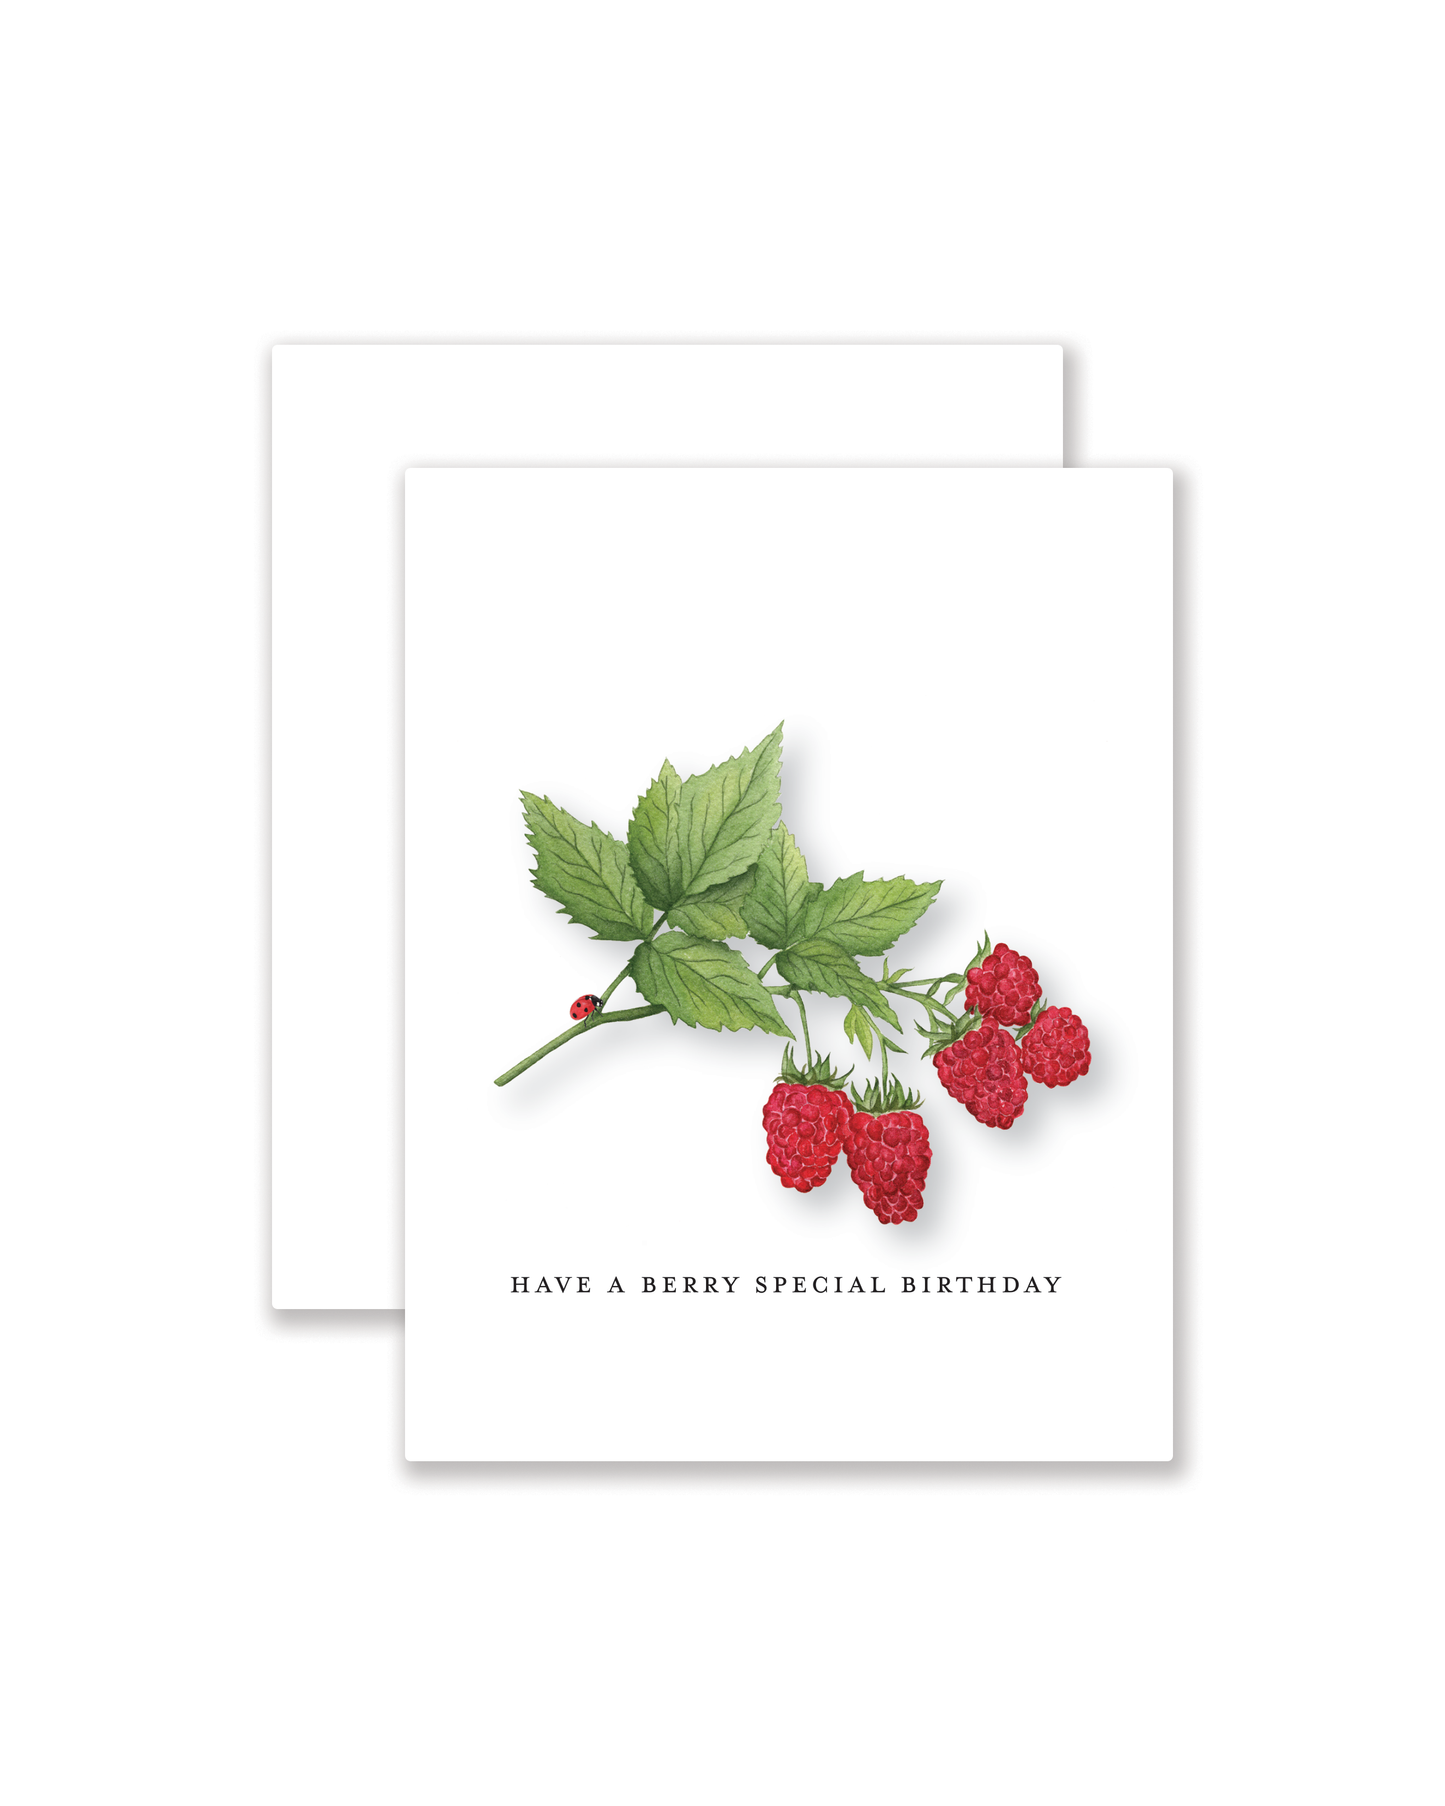 Have a Berry Special Birthday Greeting Card